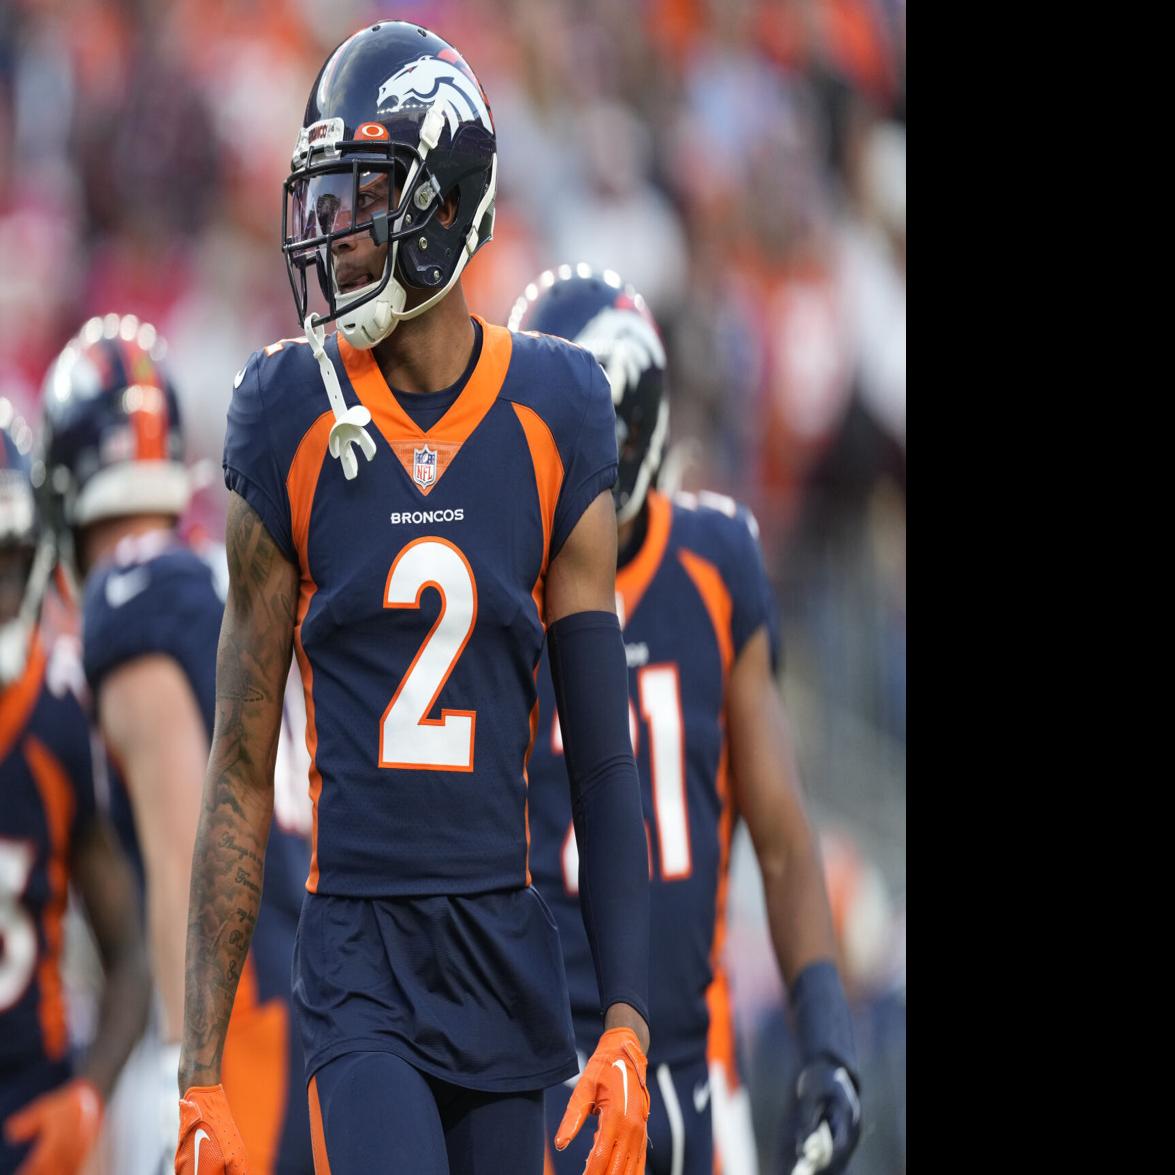 Woody Paige: Lot of new faces for Broncos, but familiar mugs will